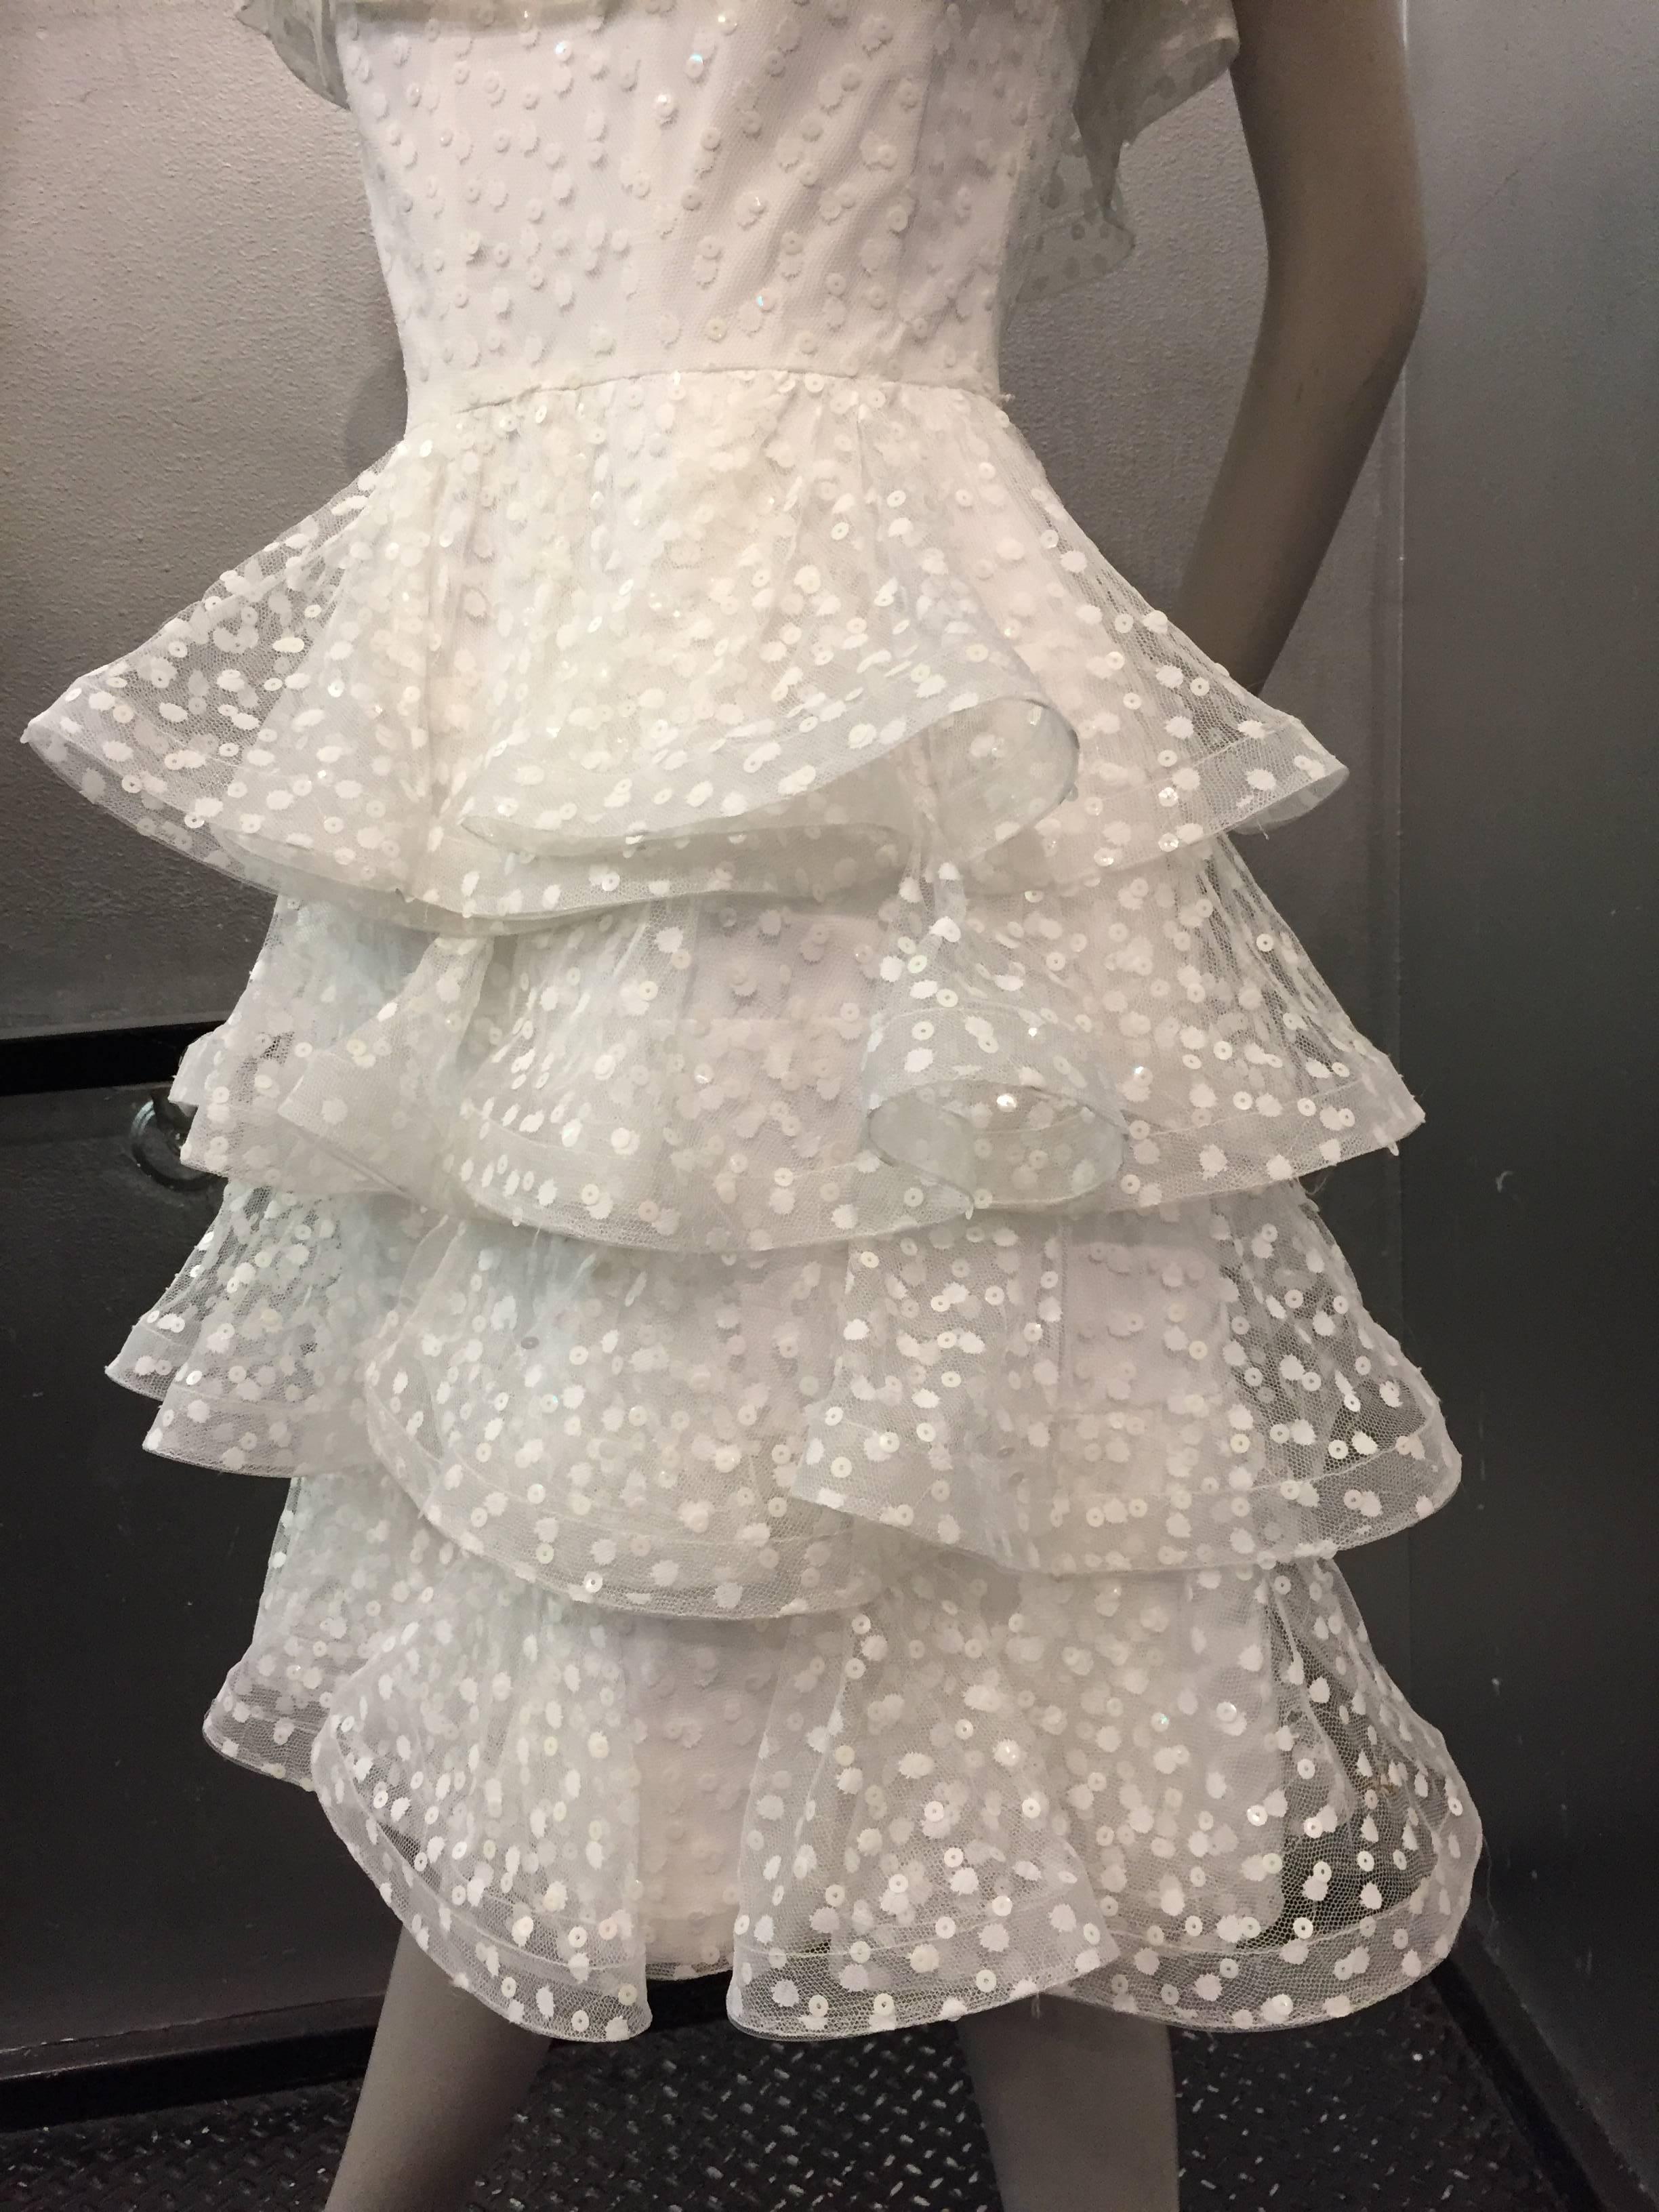 A sweet 1980s Arnold Scaasi tiered white ruffled cocktail dress in sequin embellished pointe d'esprit! Layers of ruffles at the off-the-shoulder neckline and tiers of ruffles in the skirt. 